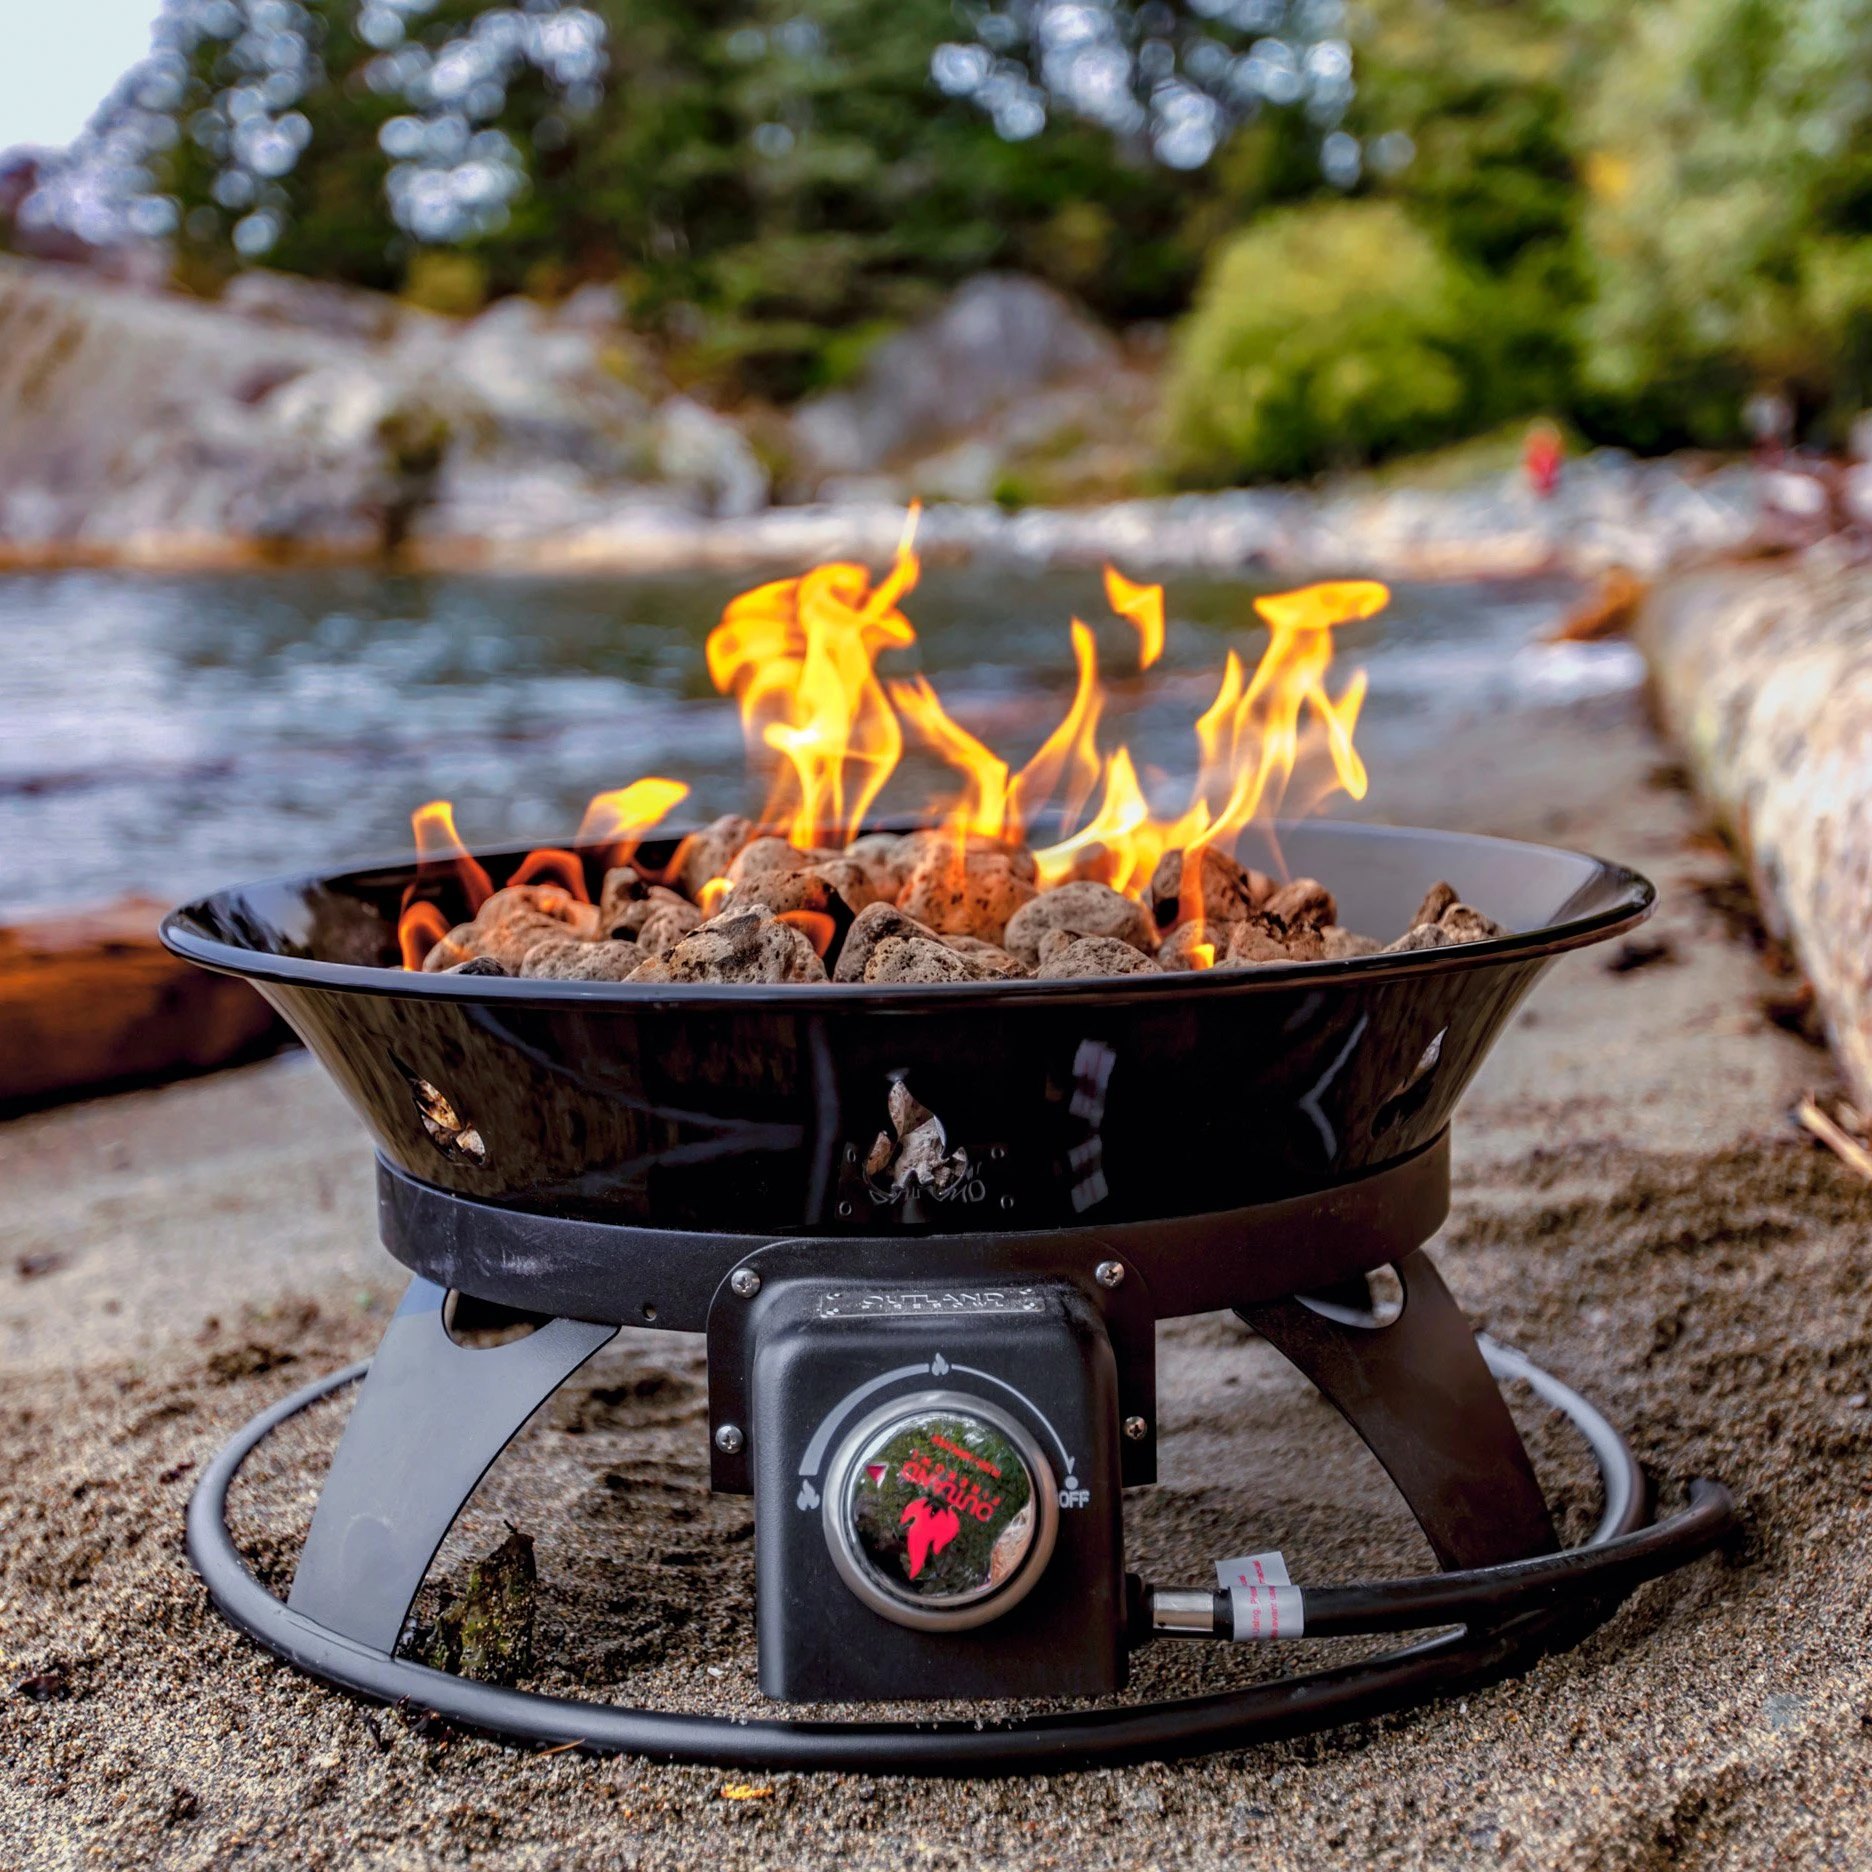 Portable Propane Fire Pits, Cooking Over Propane Fire Pit